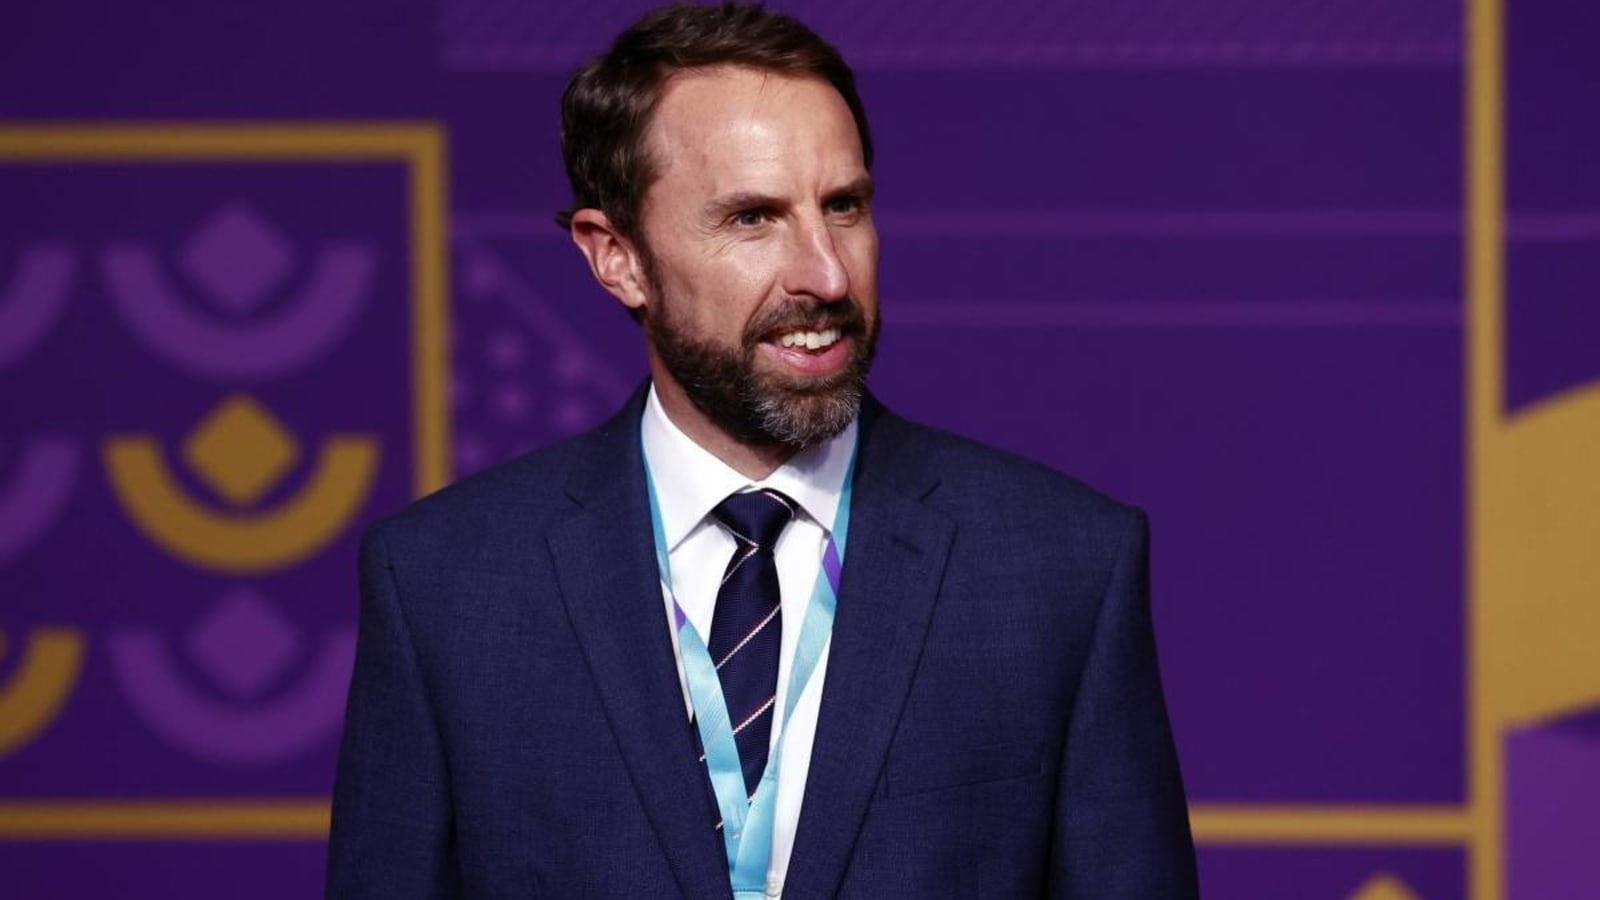 Gareth Southgate on List of Possible Replacements for Manchester United Manager Erik ten Hag